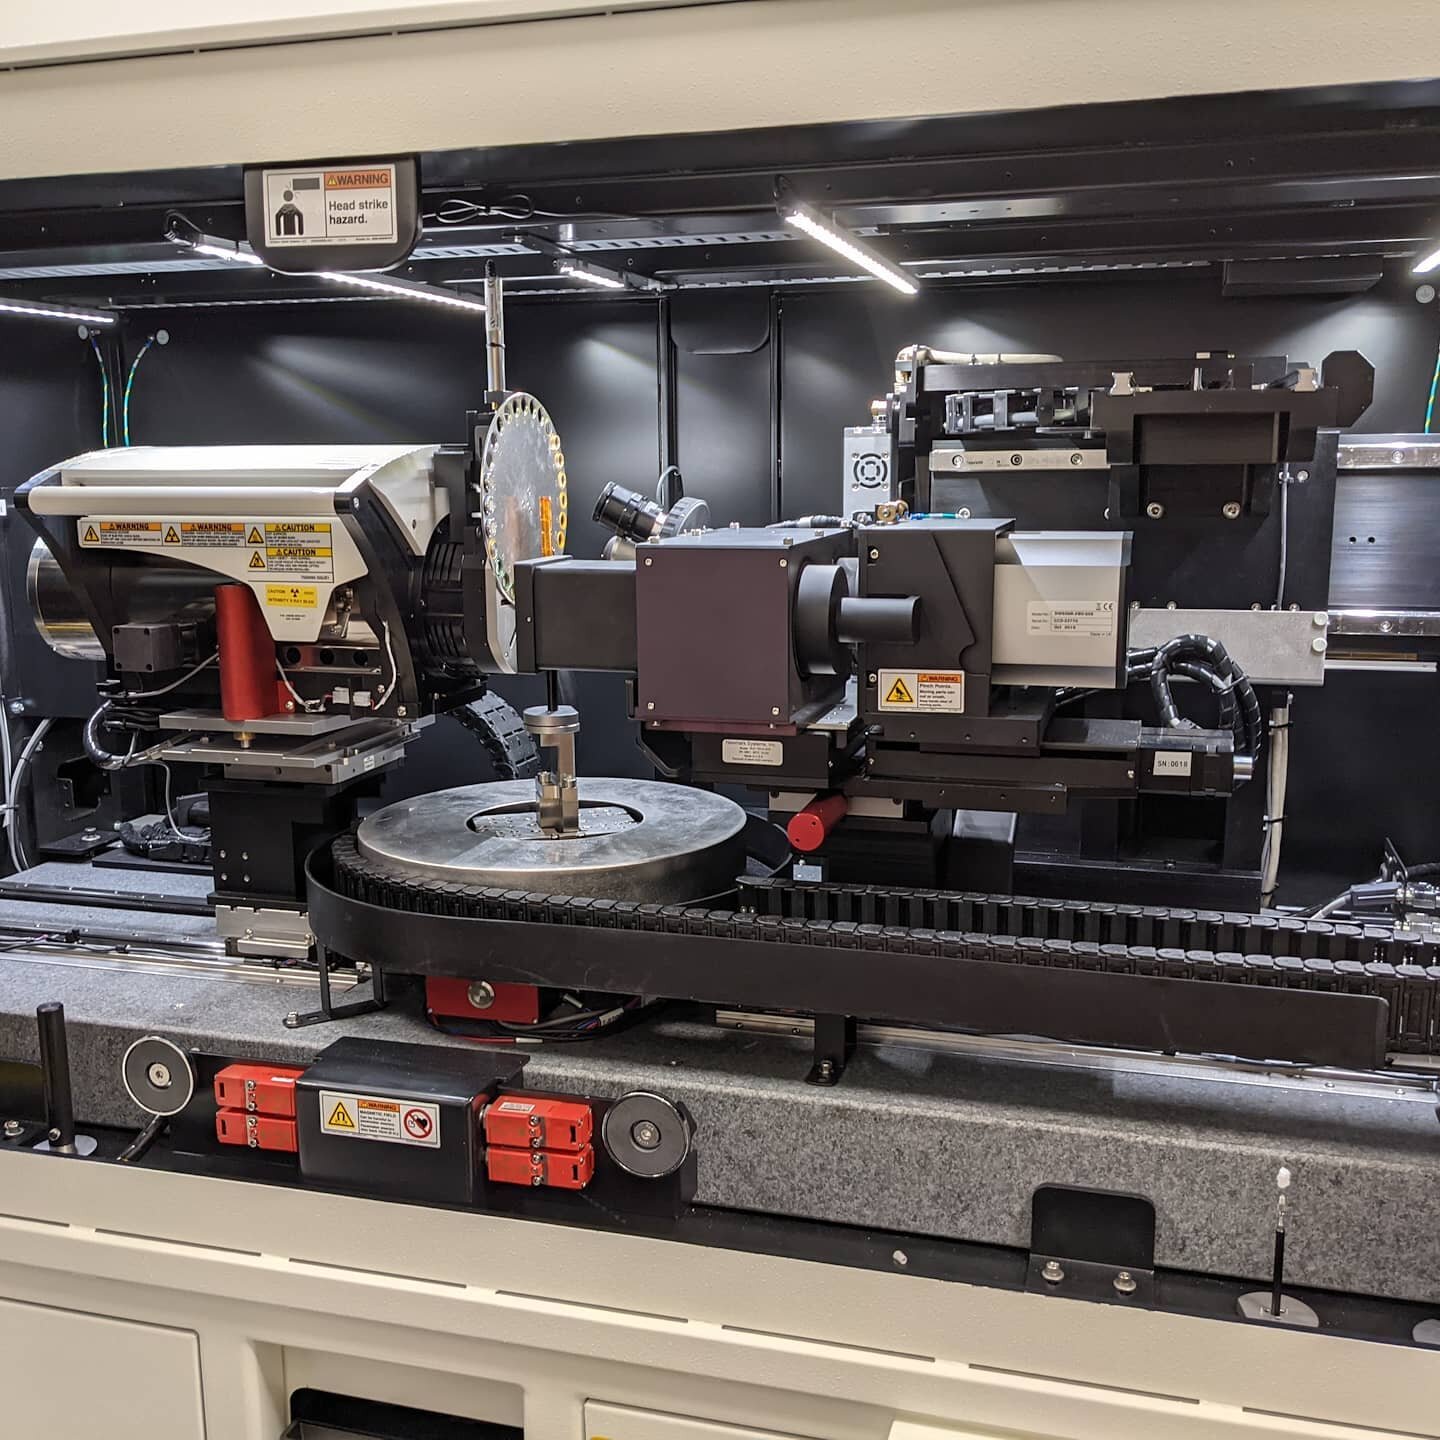 It's a lot of fun work with the engineers here at Purdue. This xradia versa xrm-620 allows us to get sub-micron x-rays and figure out how honey bees make comb and how they make such a strong structure out of a seemingly weak material.

#purdue #bees